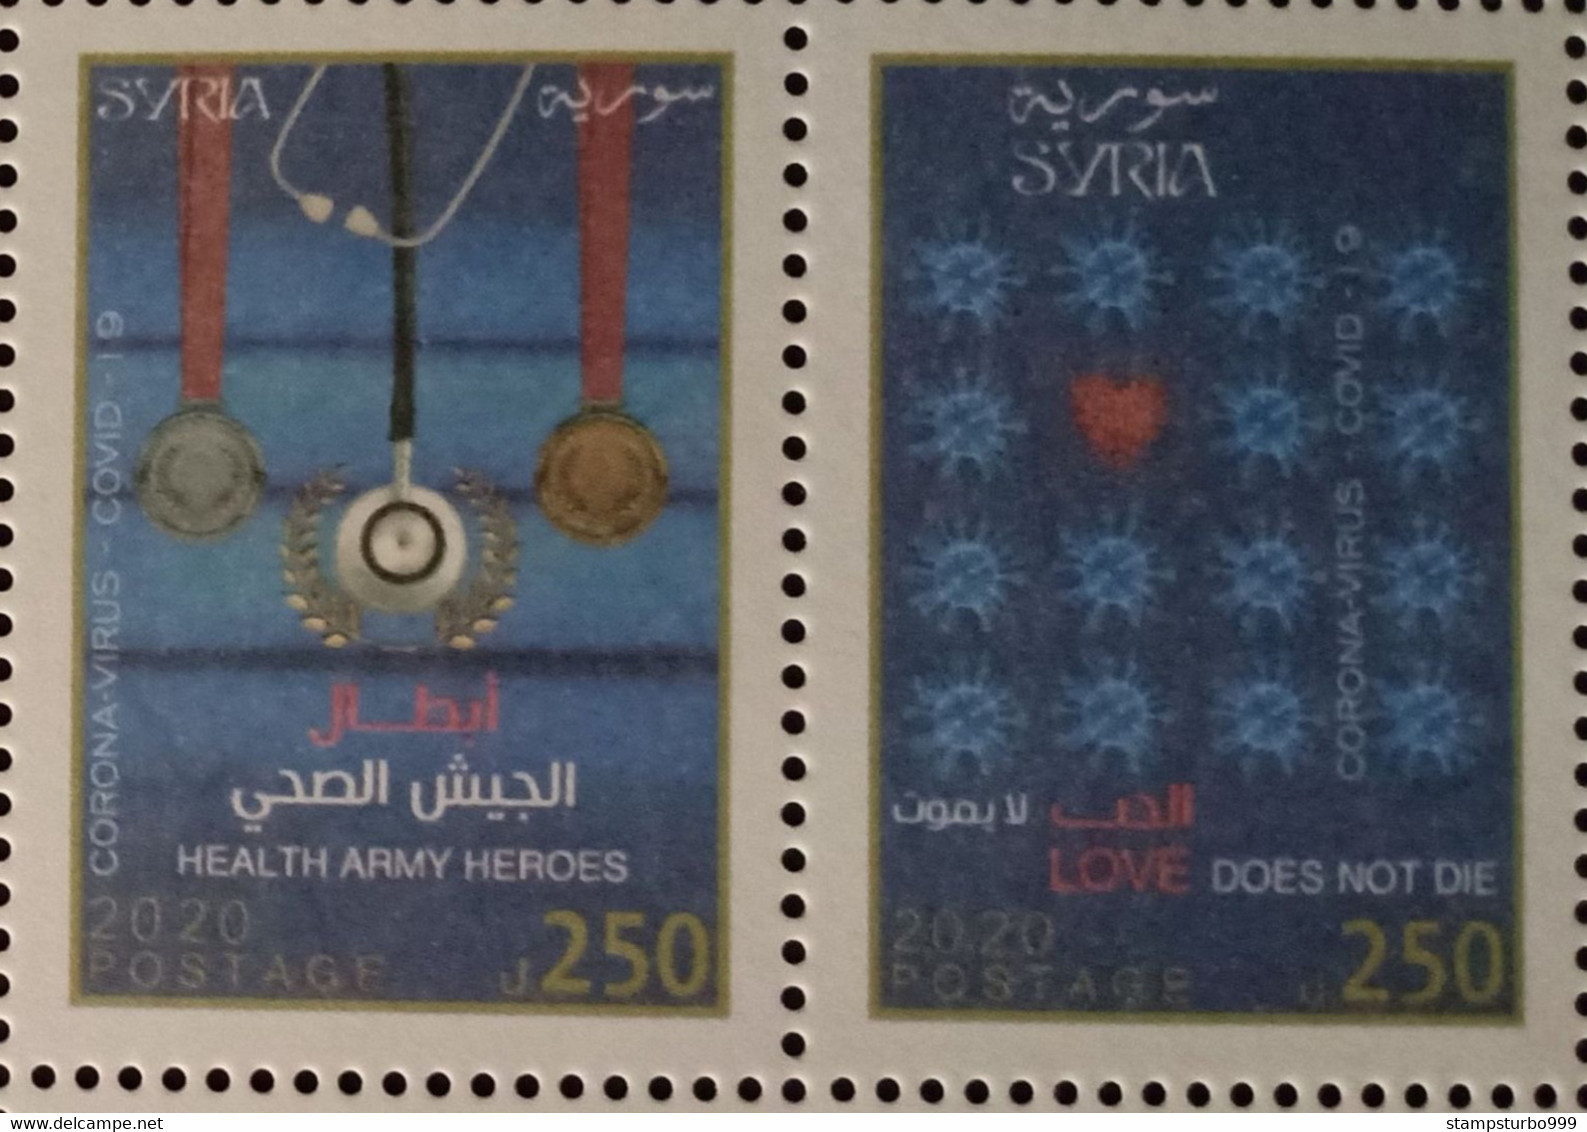 Syrien, Syrie, Syria 2020 Corona Virus (Covid-19)site As Photo, Very Rare Only 5000 Set Issued MNH ** - Nuevos